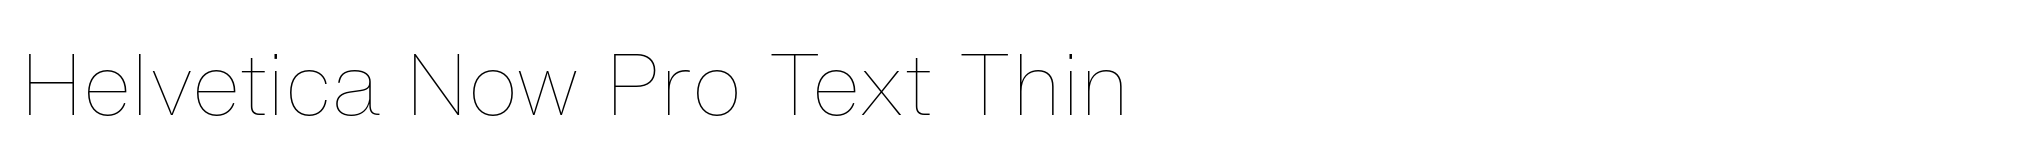 Helvetica Now Pro Text Thin image